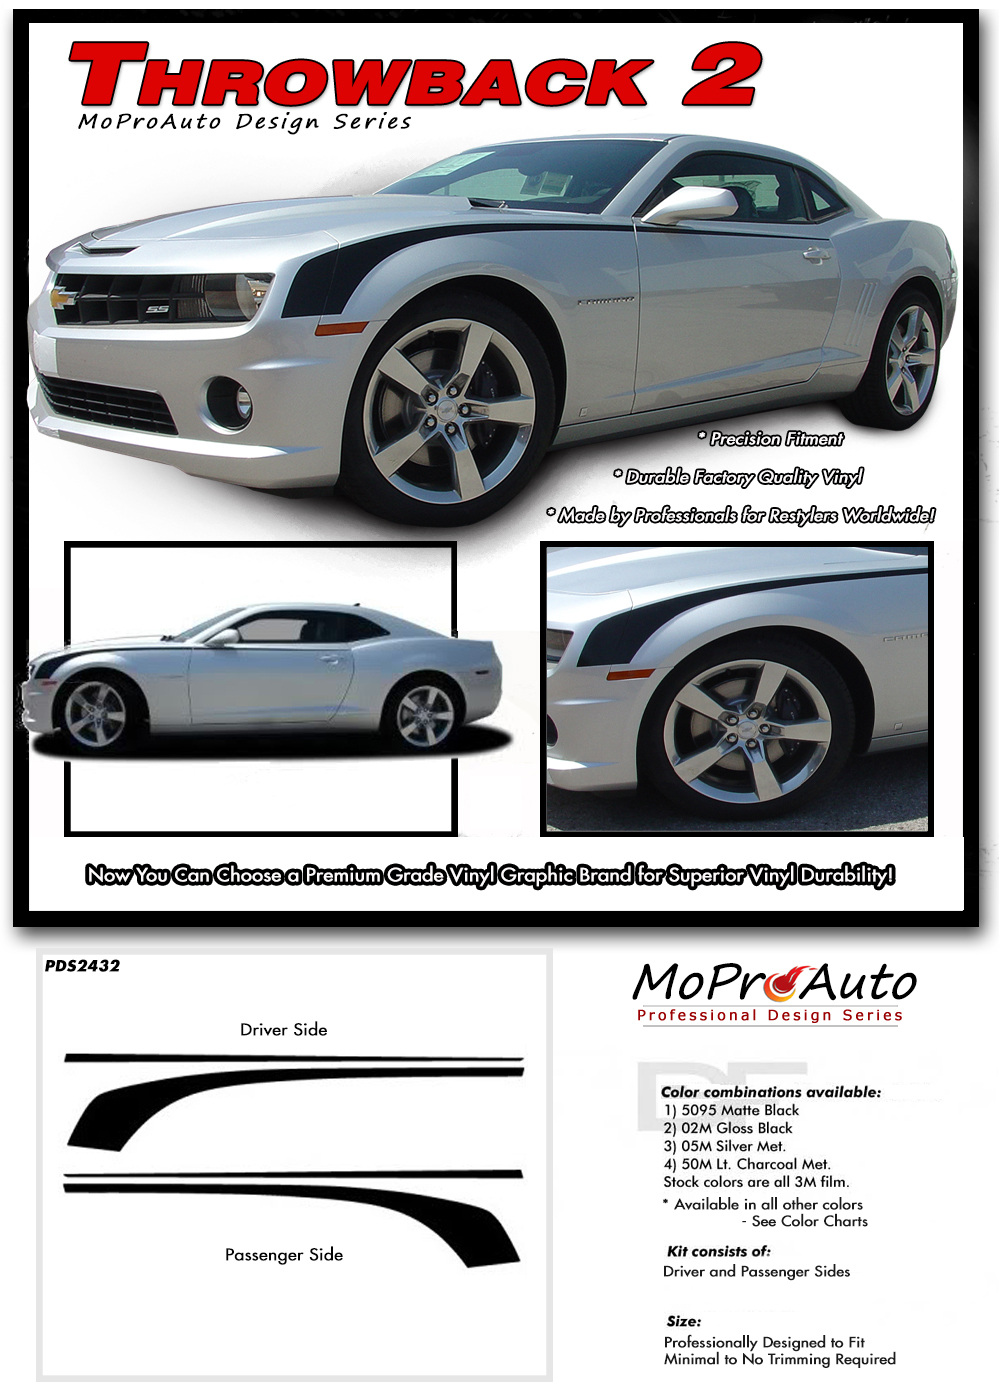 2014-2015 Throwback Chevy Camaro Vinyl Graphics Kits, Decals, Stripes by MoProAuto